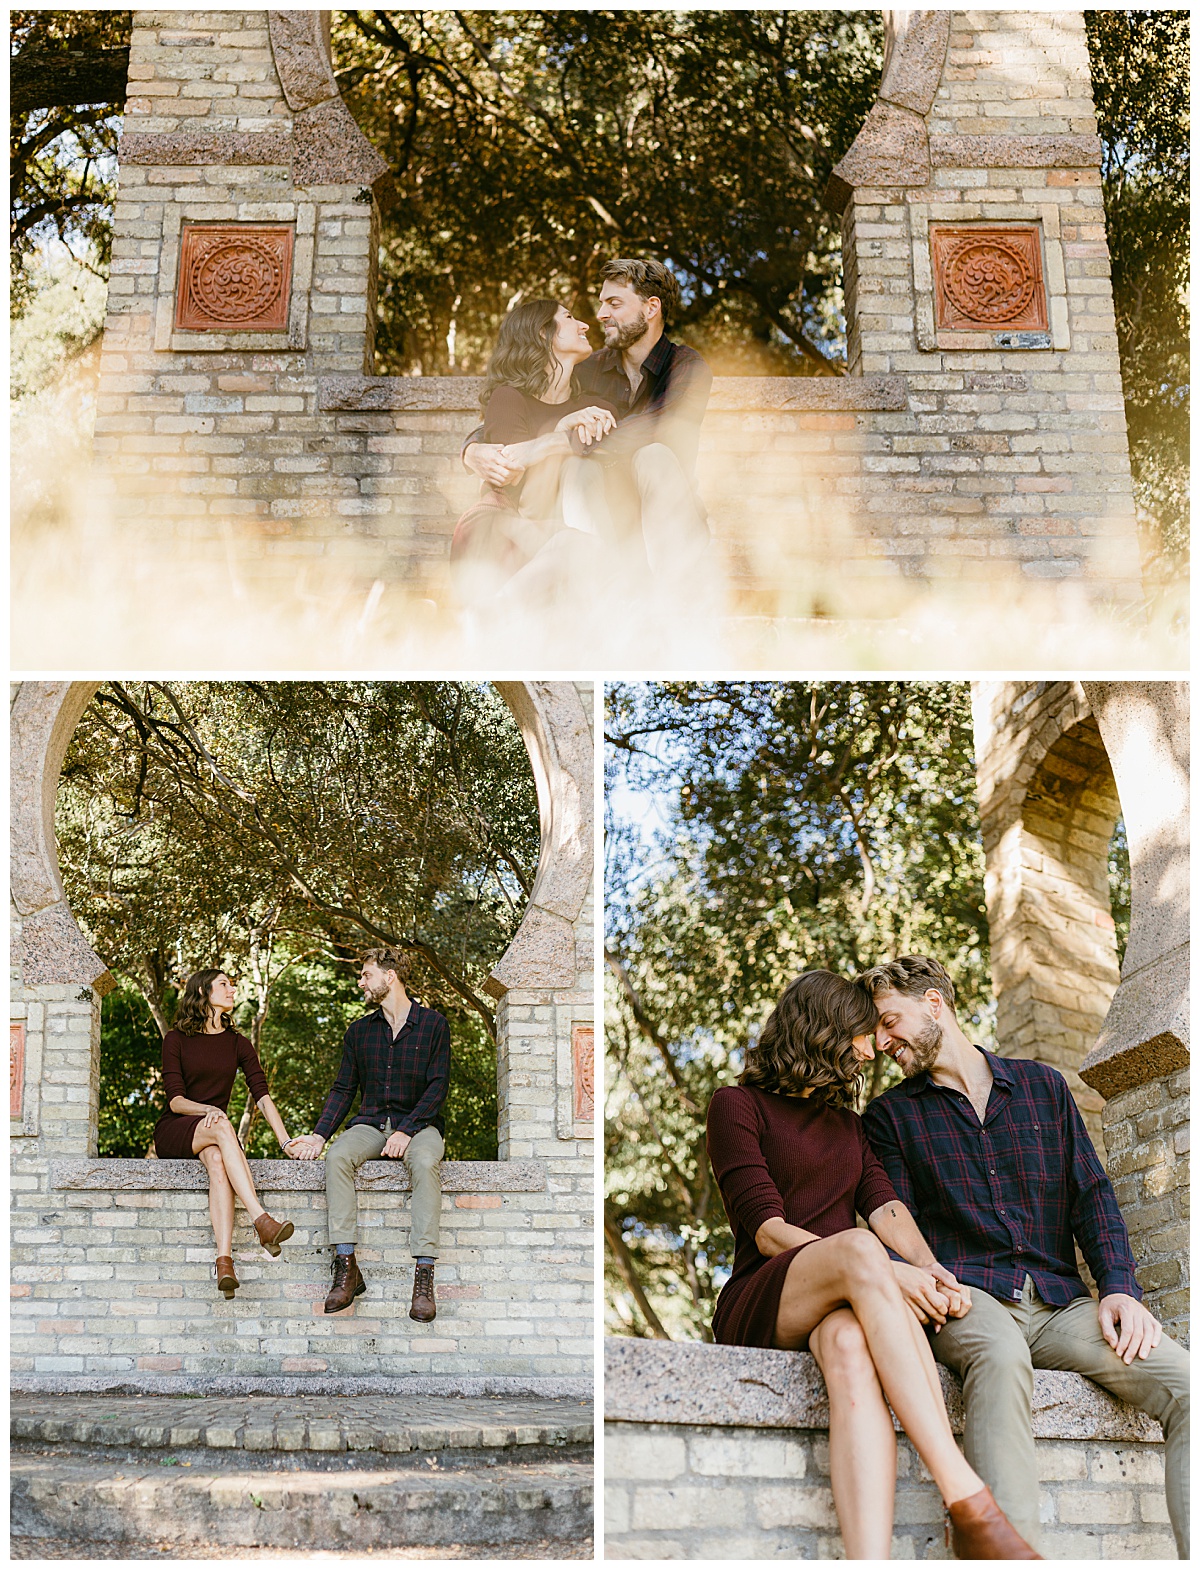 Couple sits together on brick structure by Austin wedding photographer